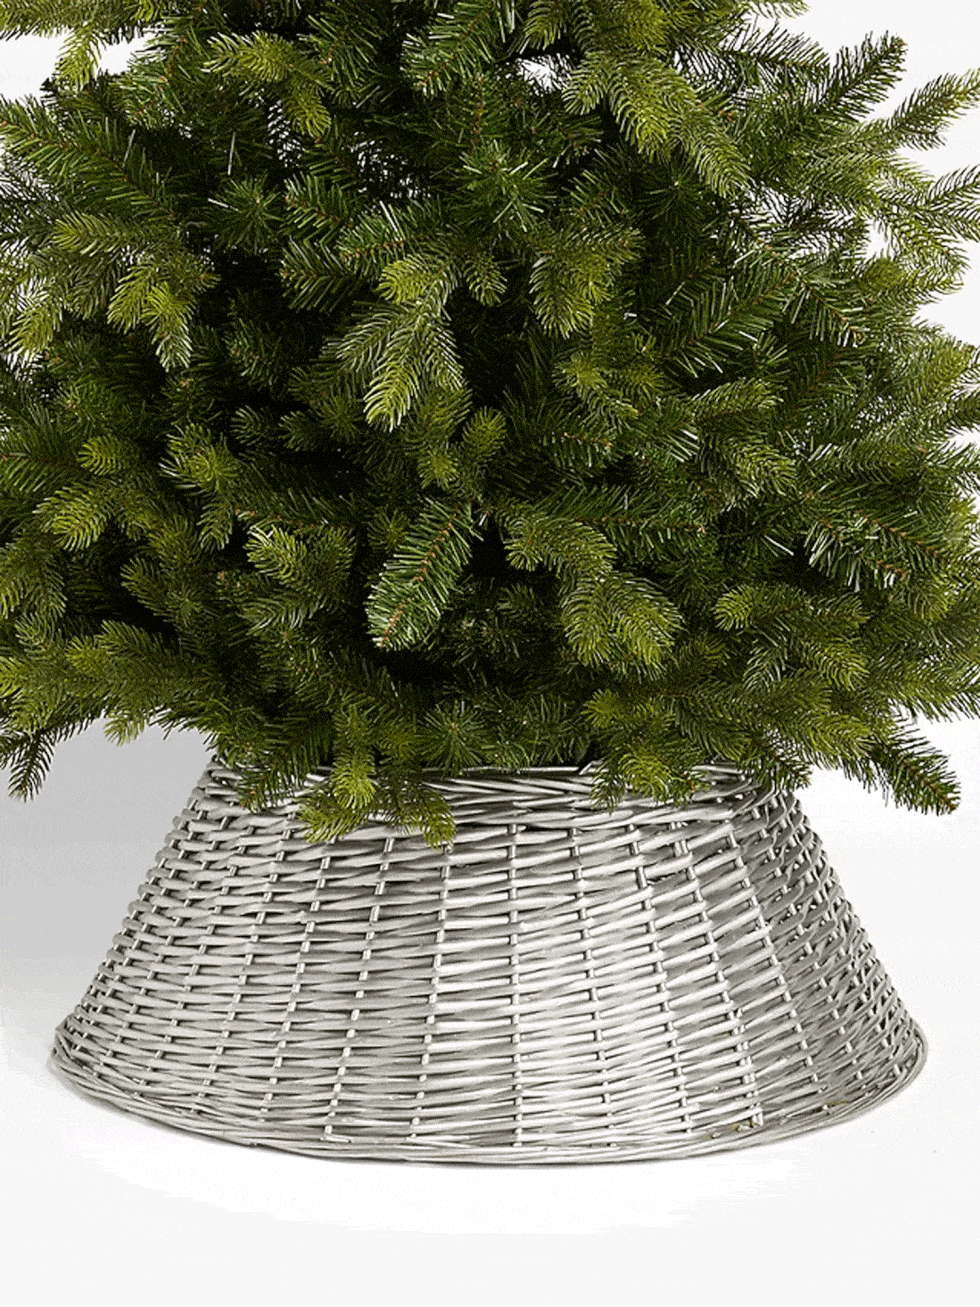 Polar Planet Willow Tree Skirt, Silver, Extra Large- £28-£35